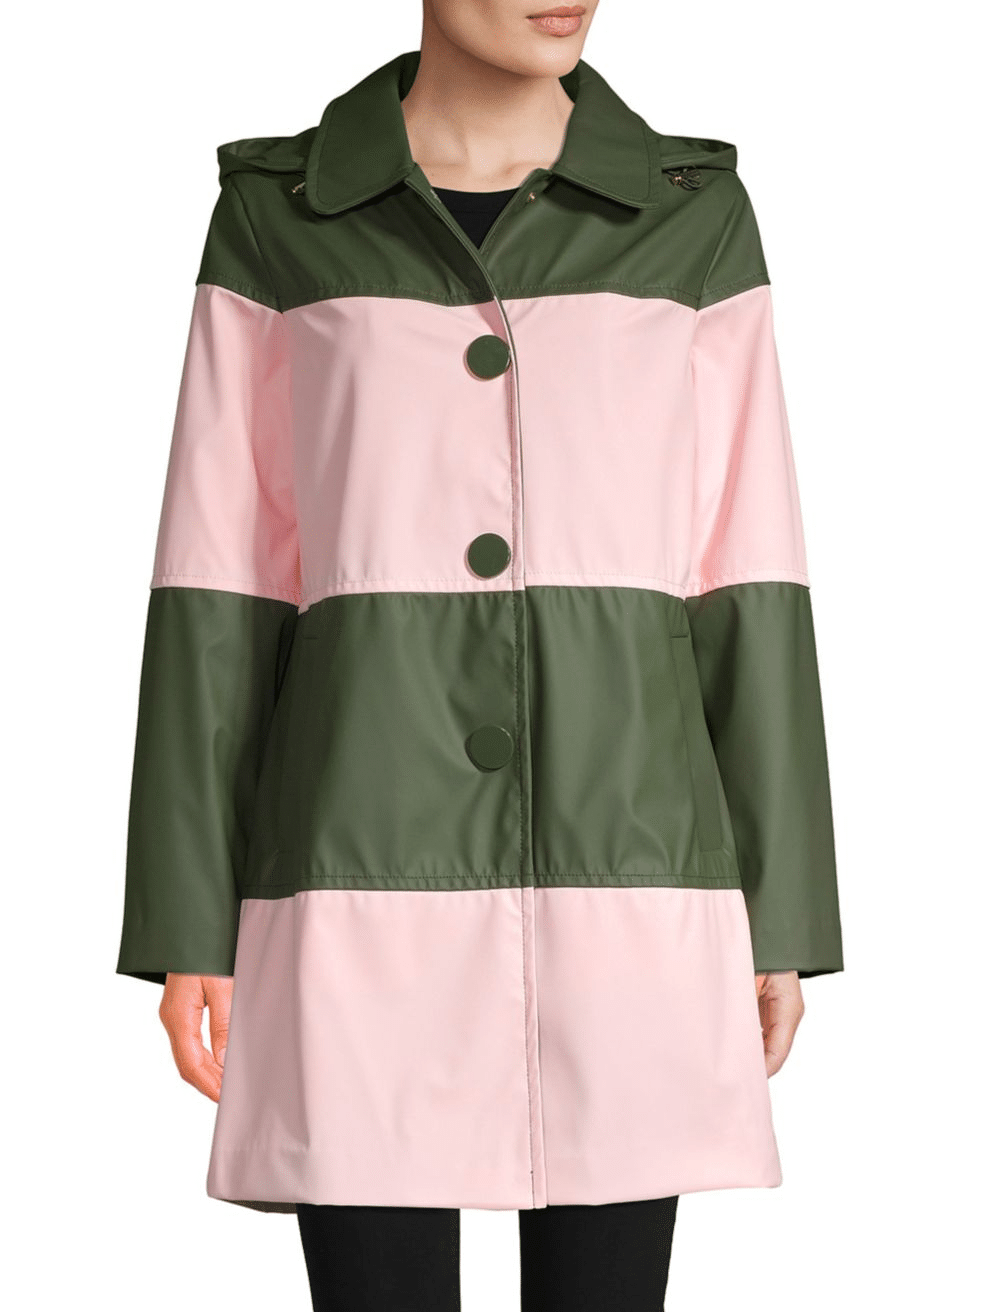 April Showers Are No Match For This Ultra Chic Rain Gear